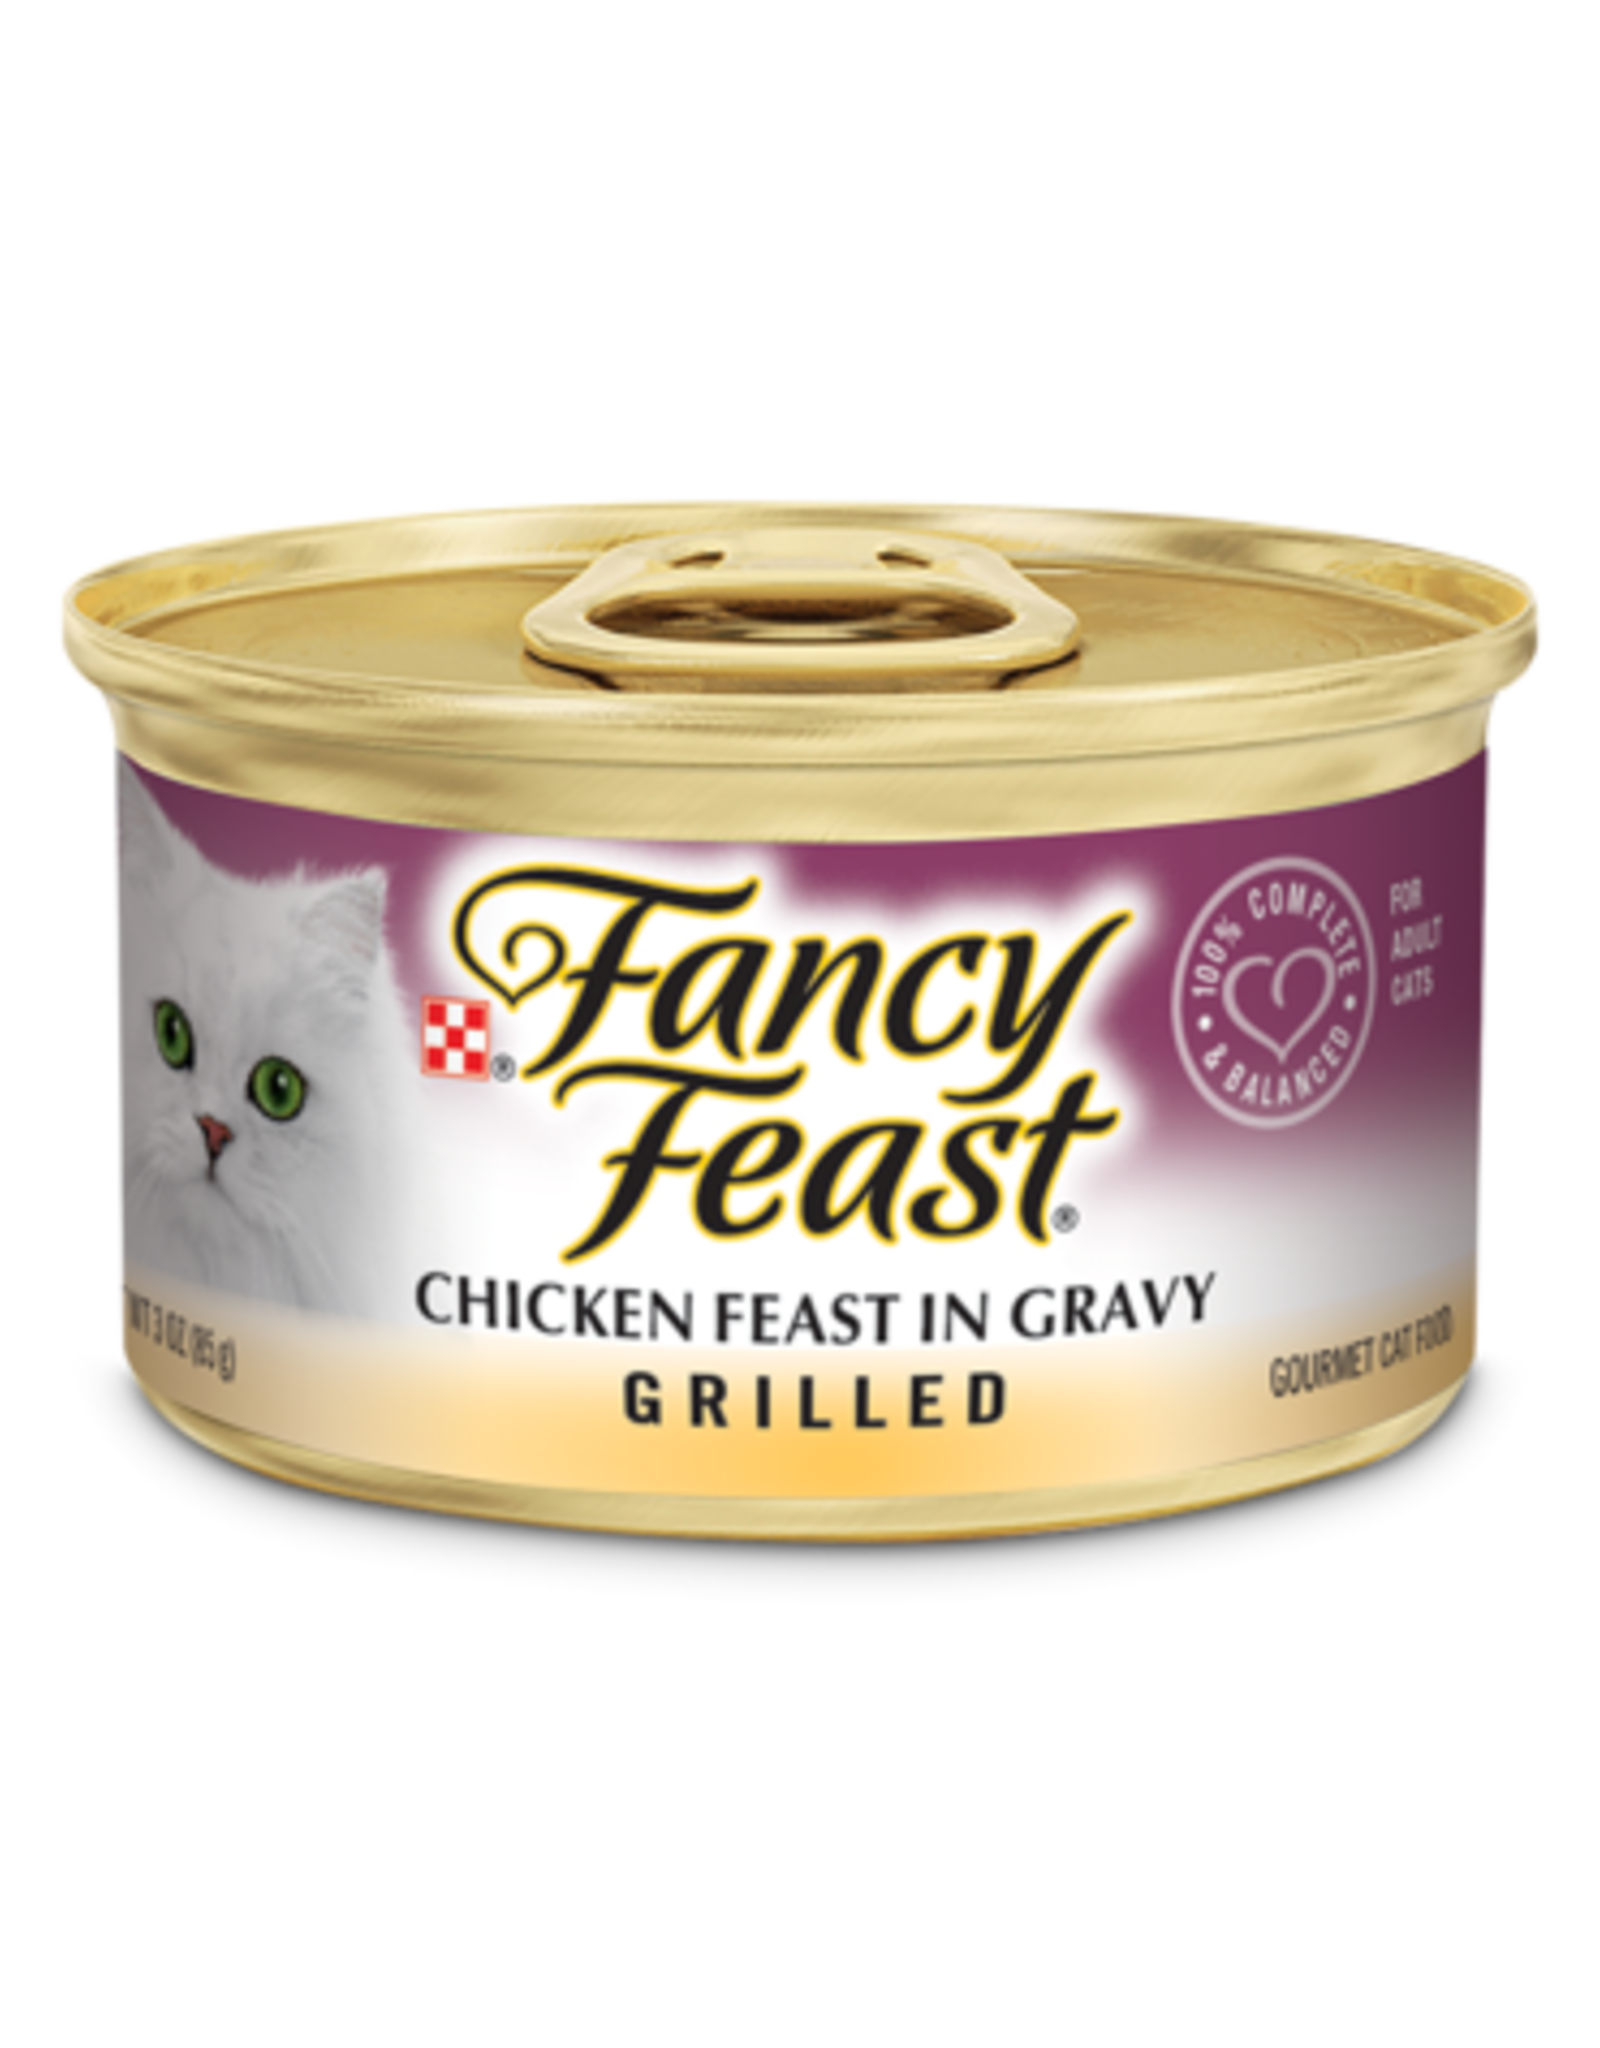 NESTLE PURINA PETCARE FANCY FEAST GRILLED CHICKEN 3OZ CASE OF 24